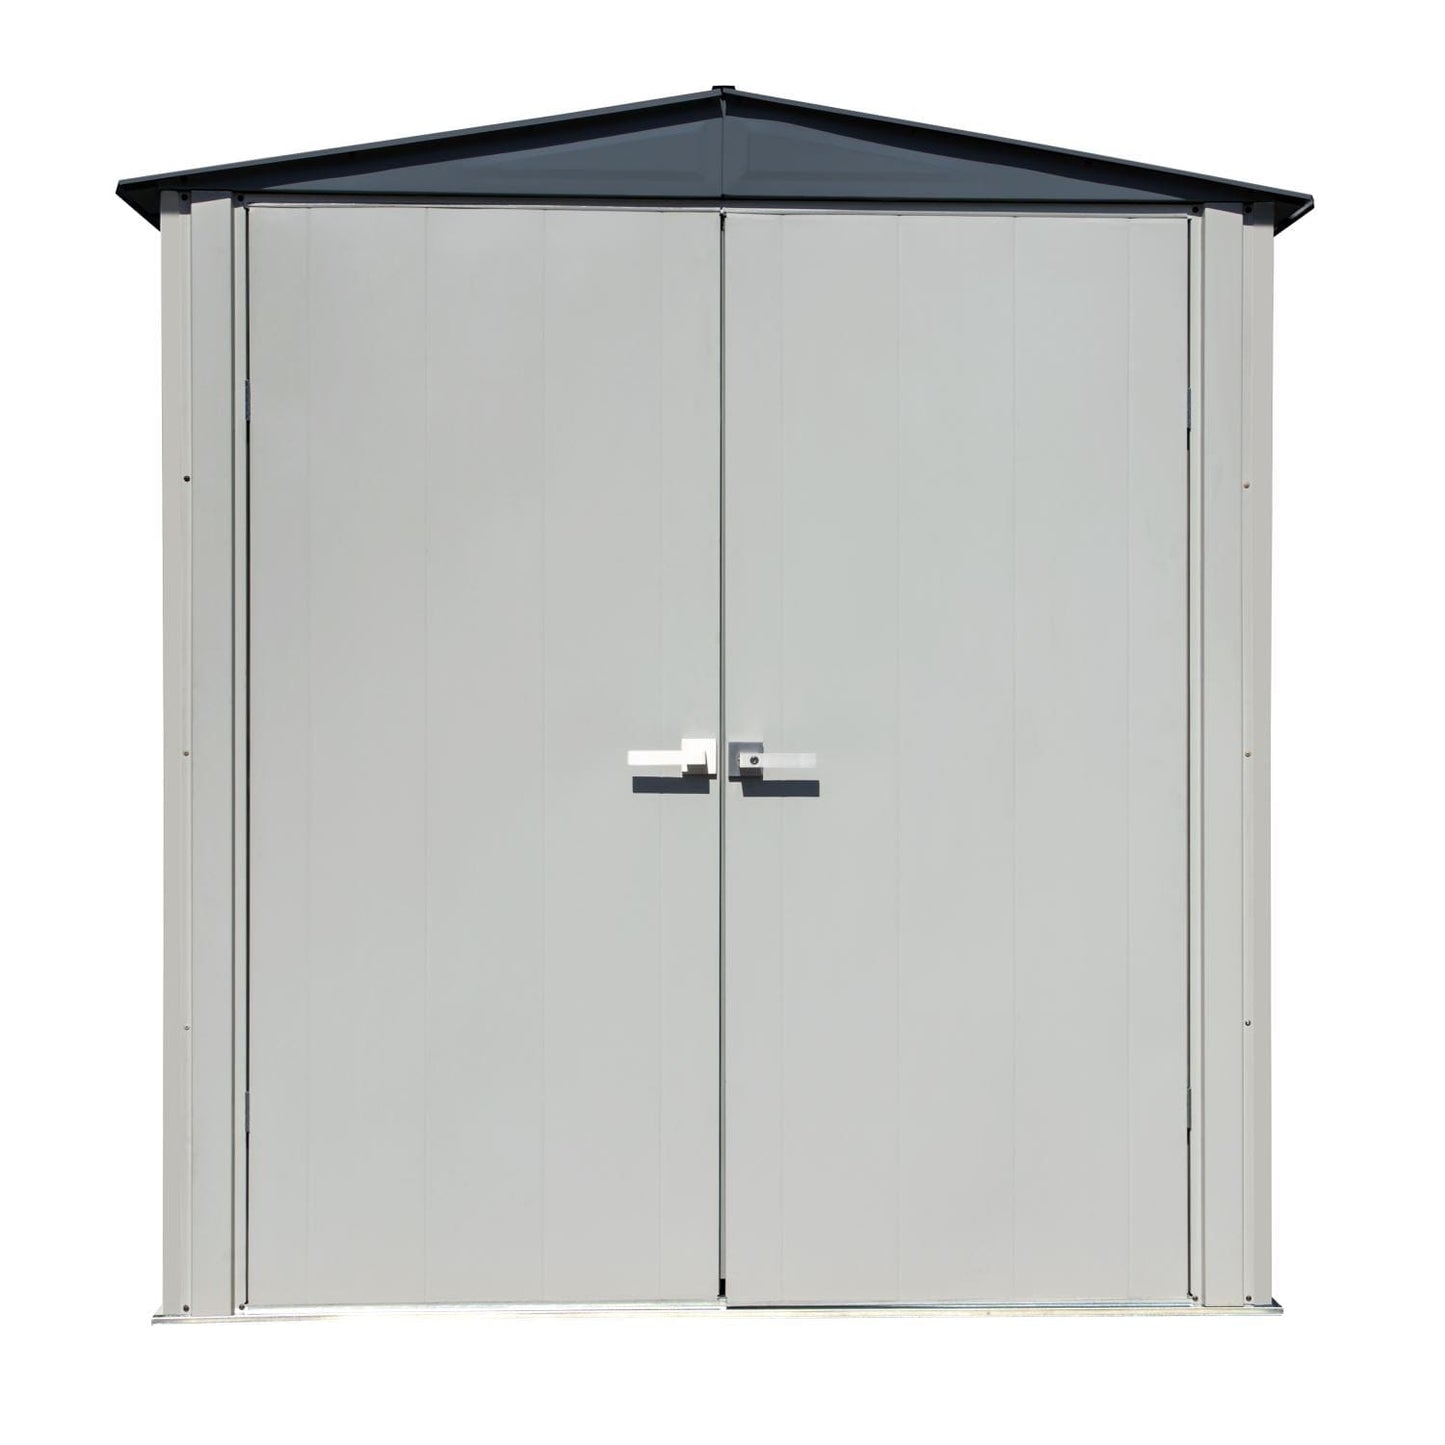 Spacemaker Patio Shed 6' x 3' - Flute Grey and Anthracite - mygreenhousestore.com